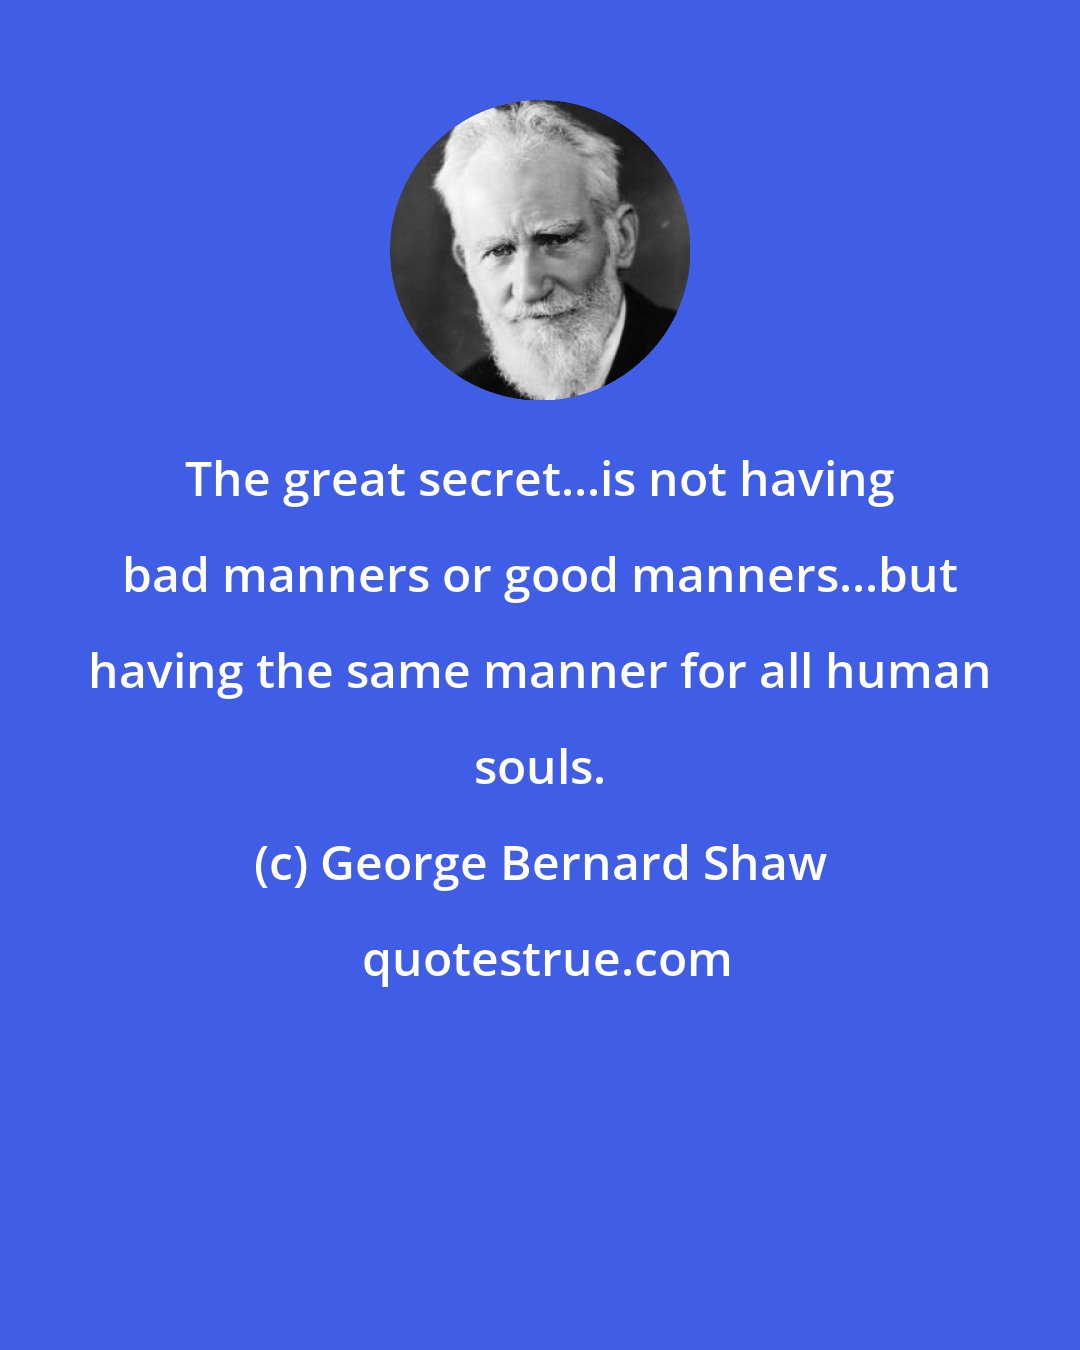 George Bernard Shaw: The great secret...is not having bad manners or good manners...but having the same manner for all human souls.